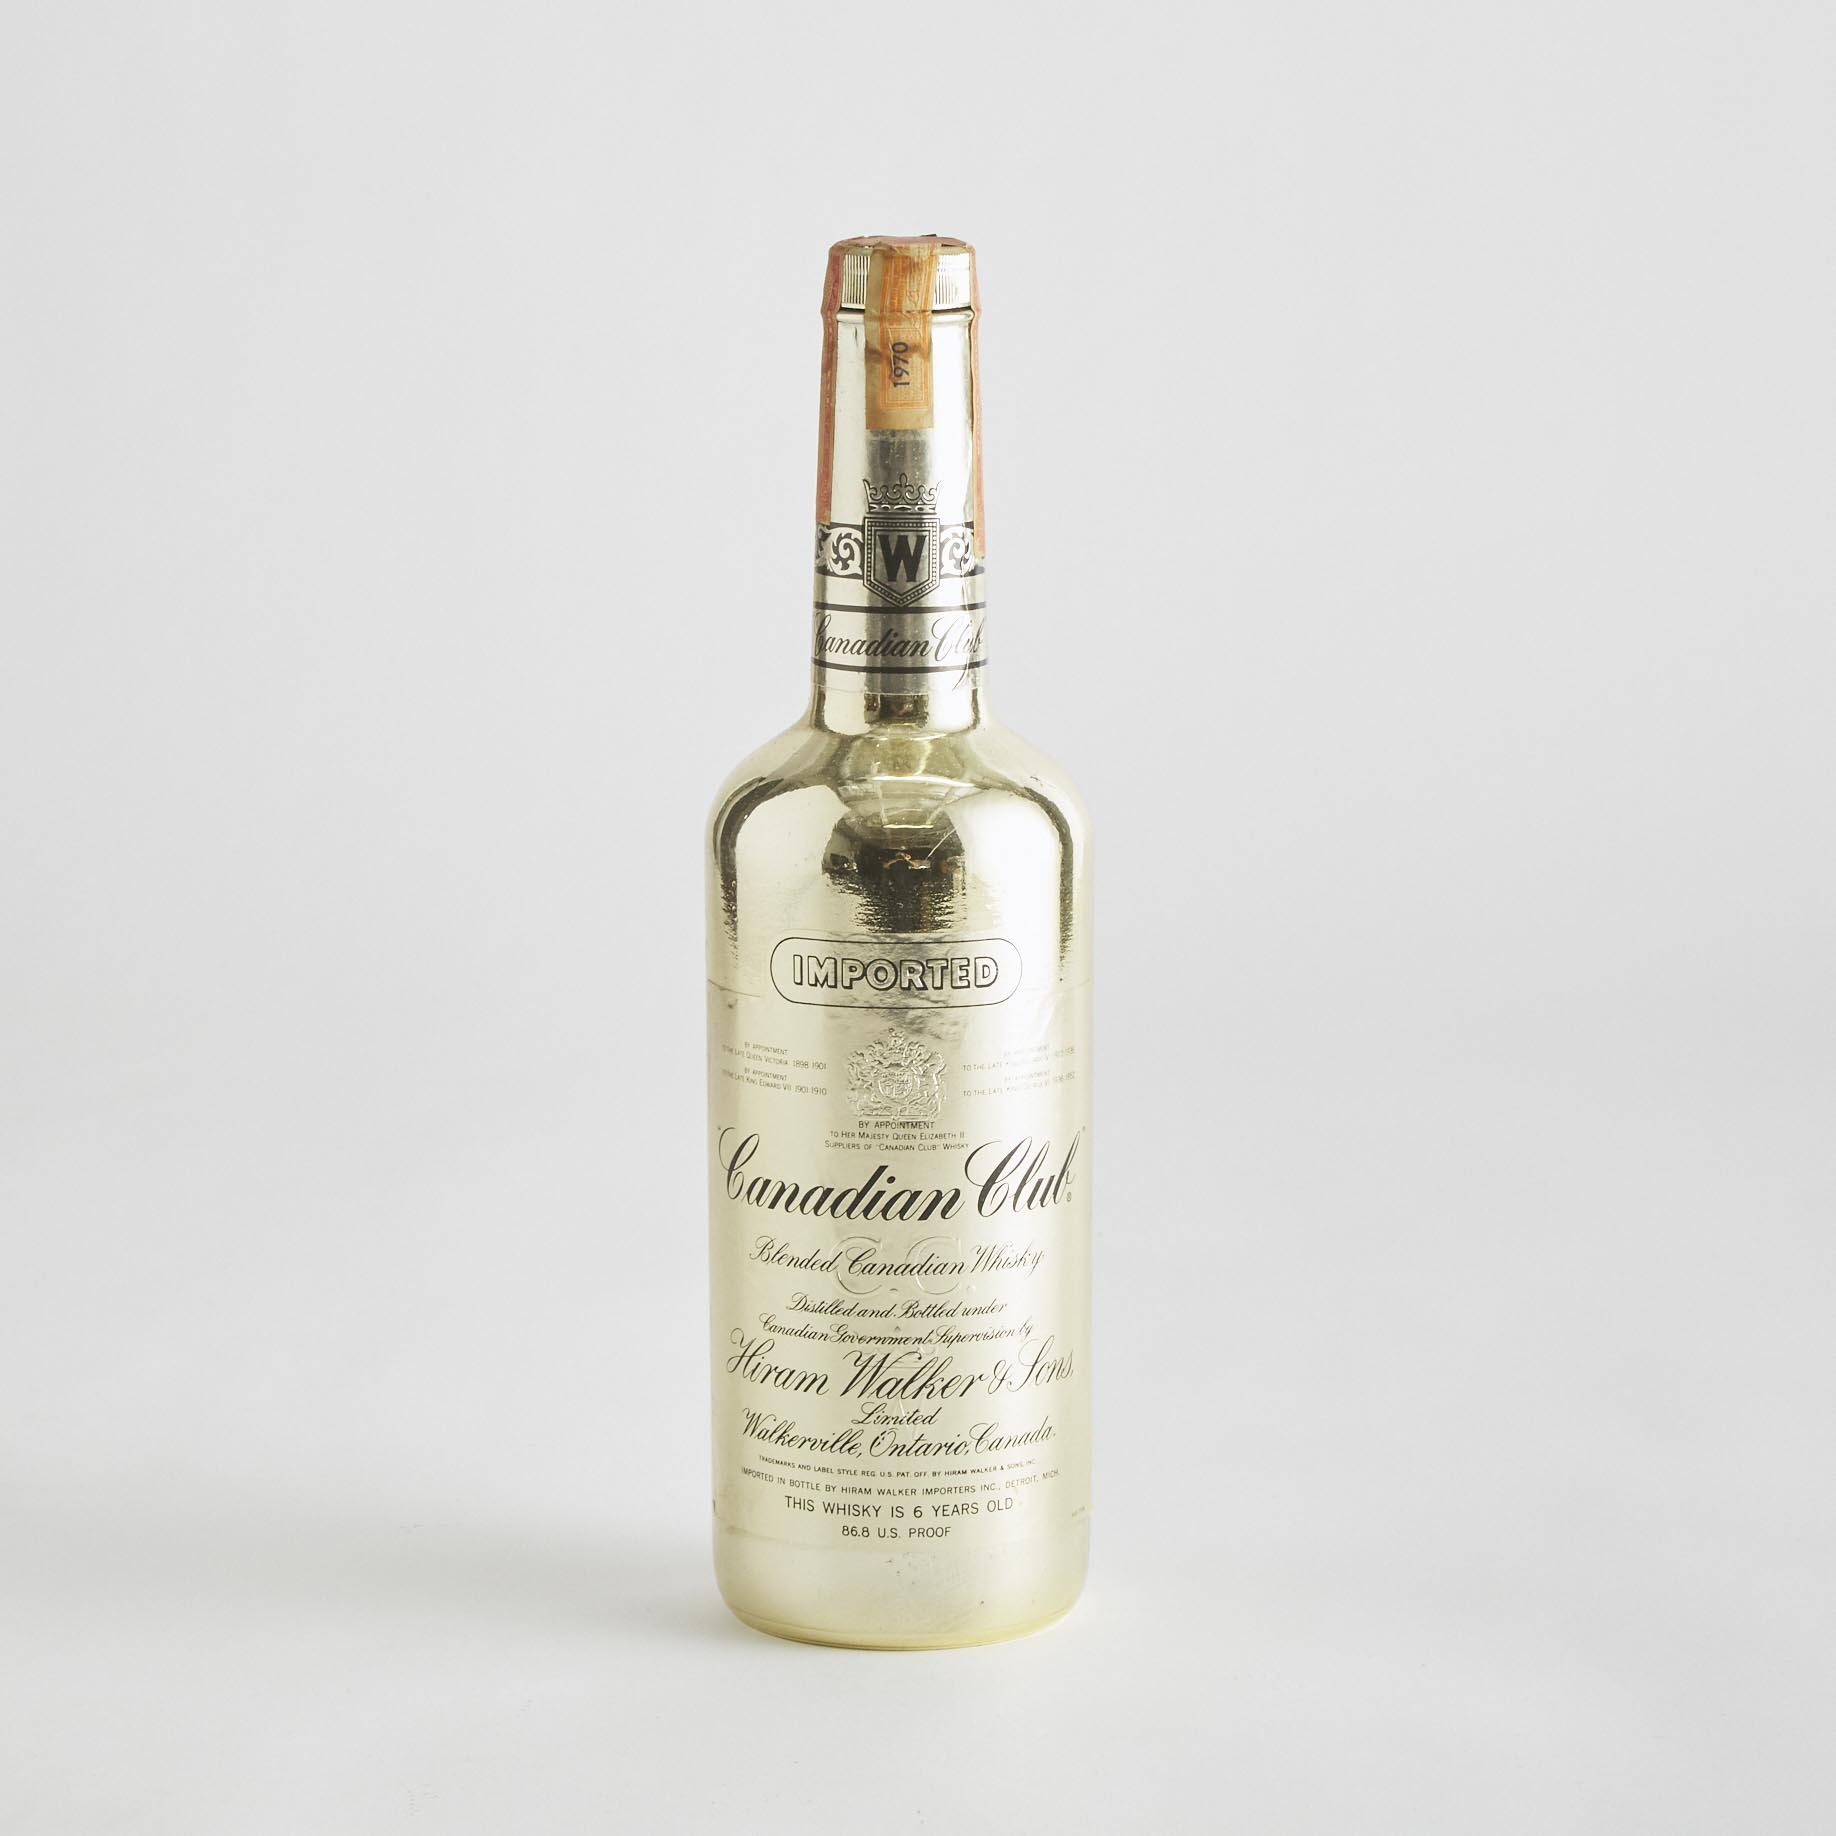 CANADIAN CLUB CANADIAN WHISKY 6 YEARS (ONE 750 ML?)